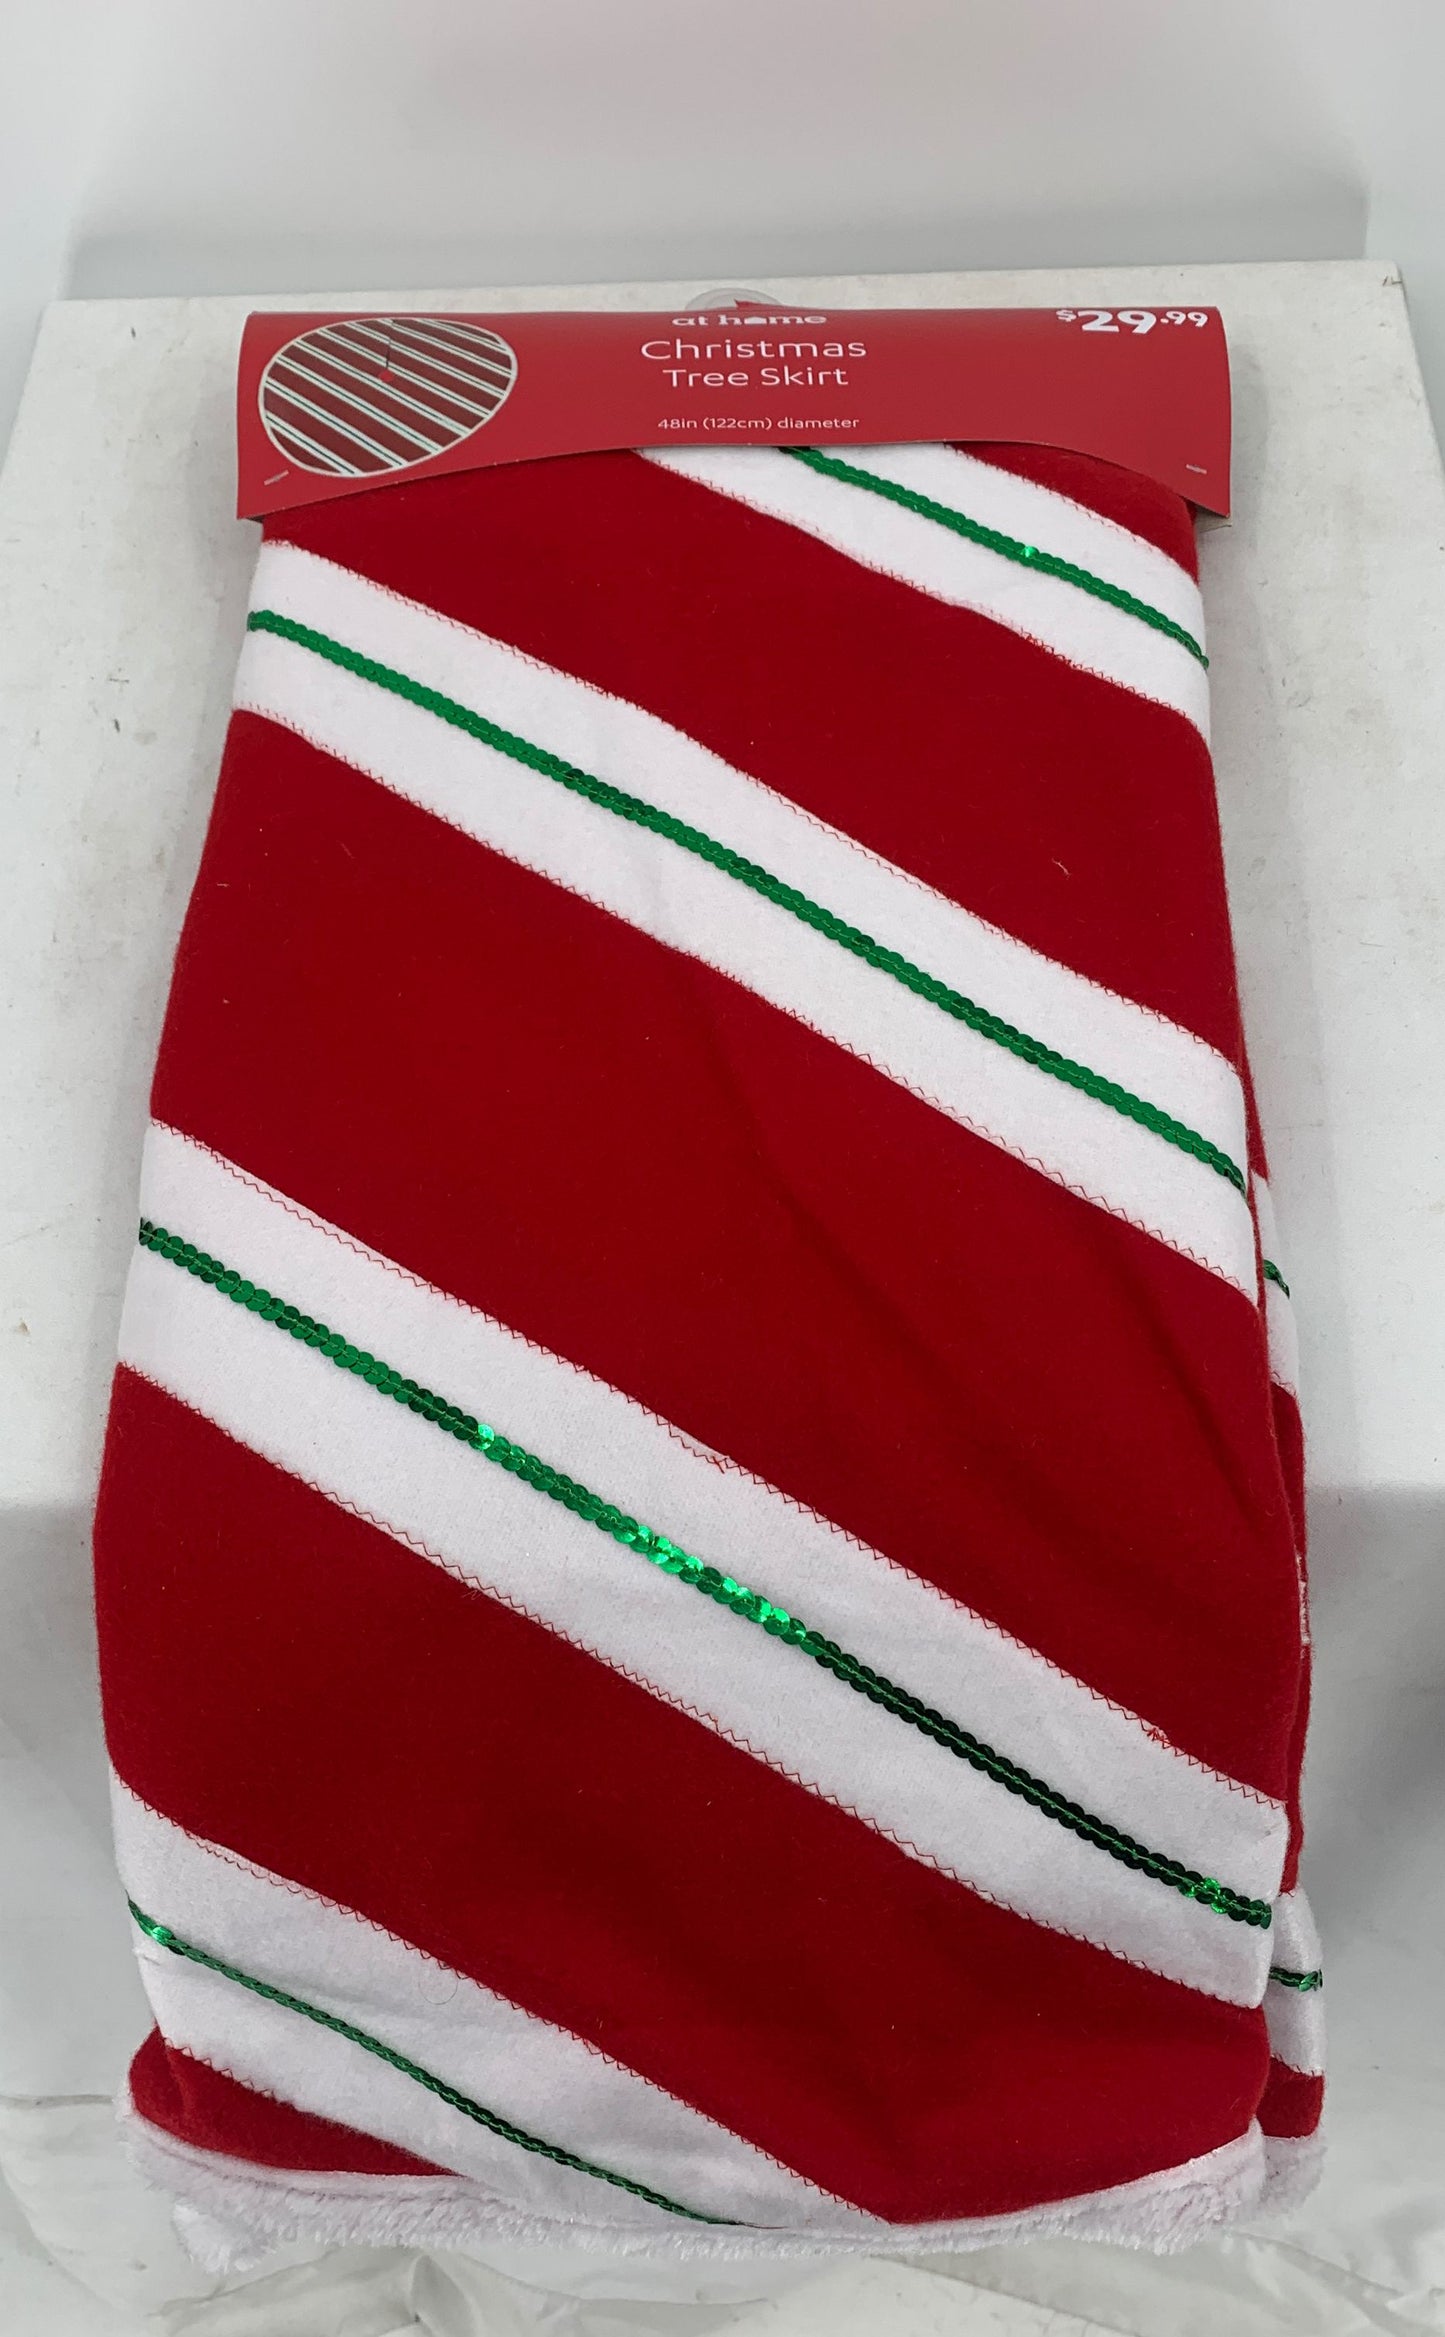 At Home New Striped 48" Christmas Tree Skirt